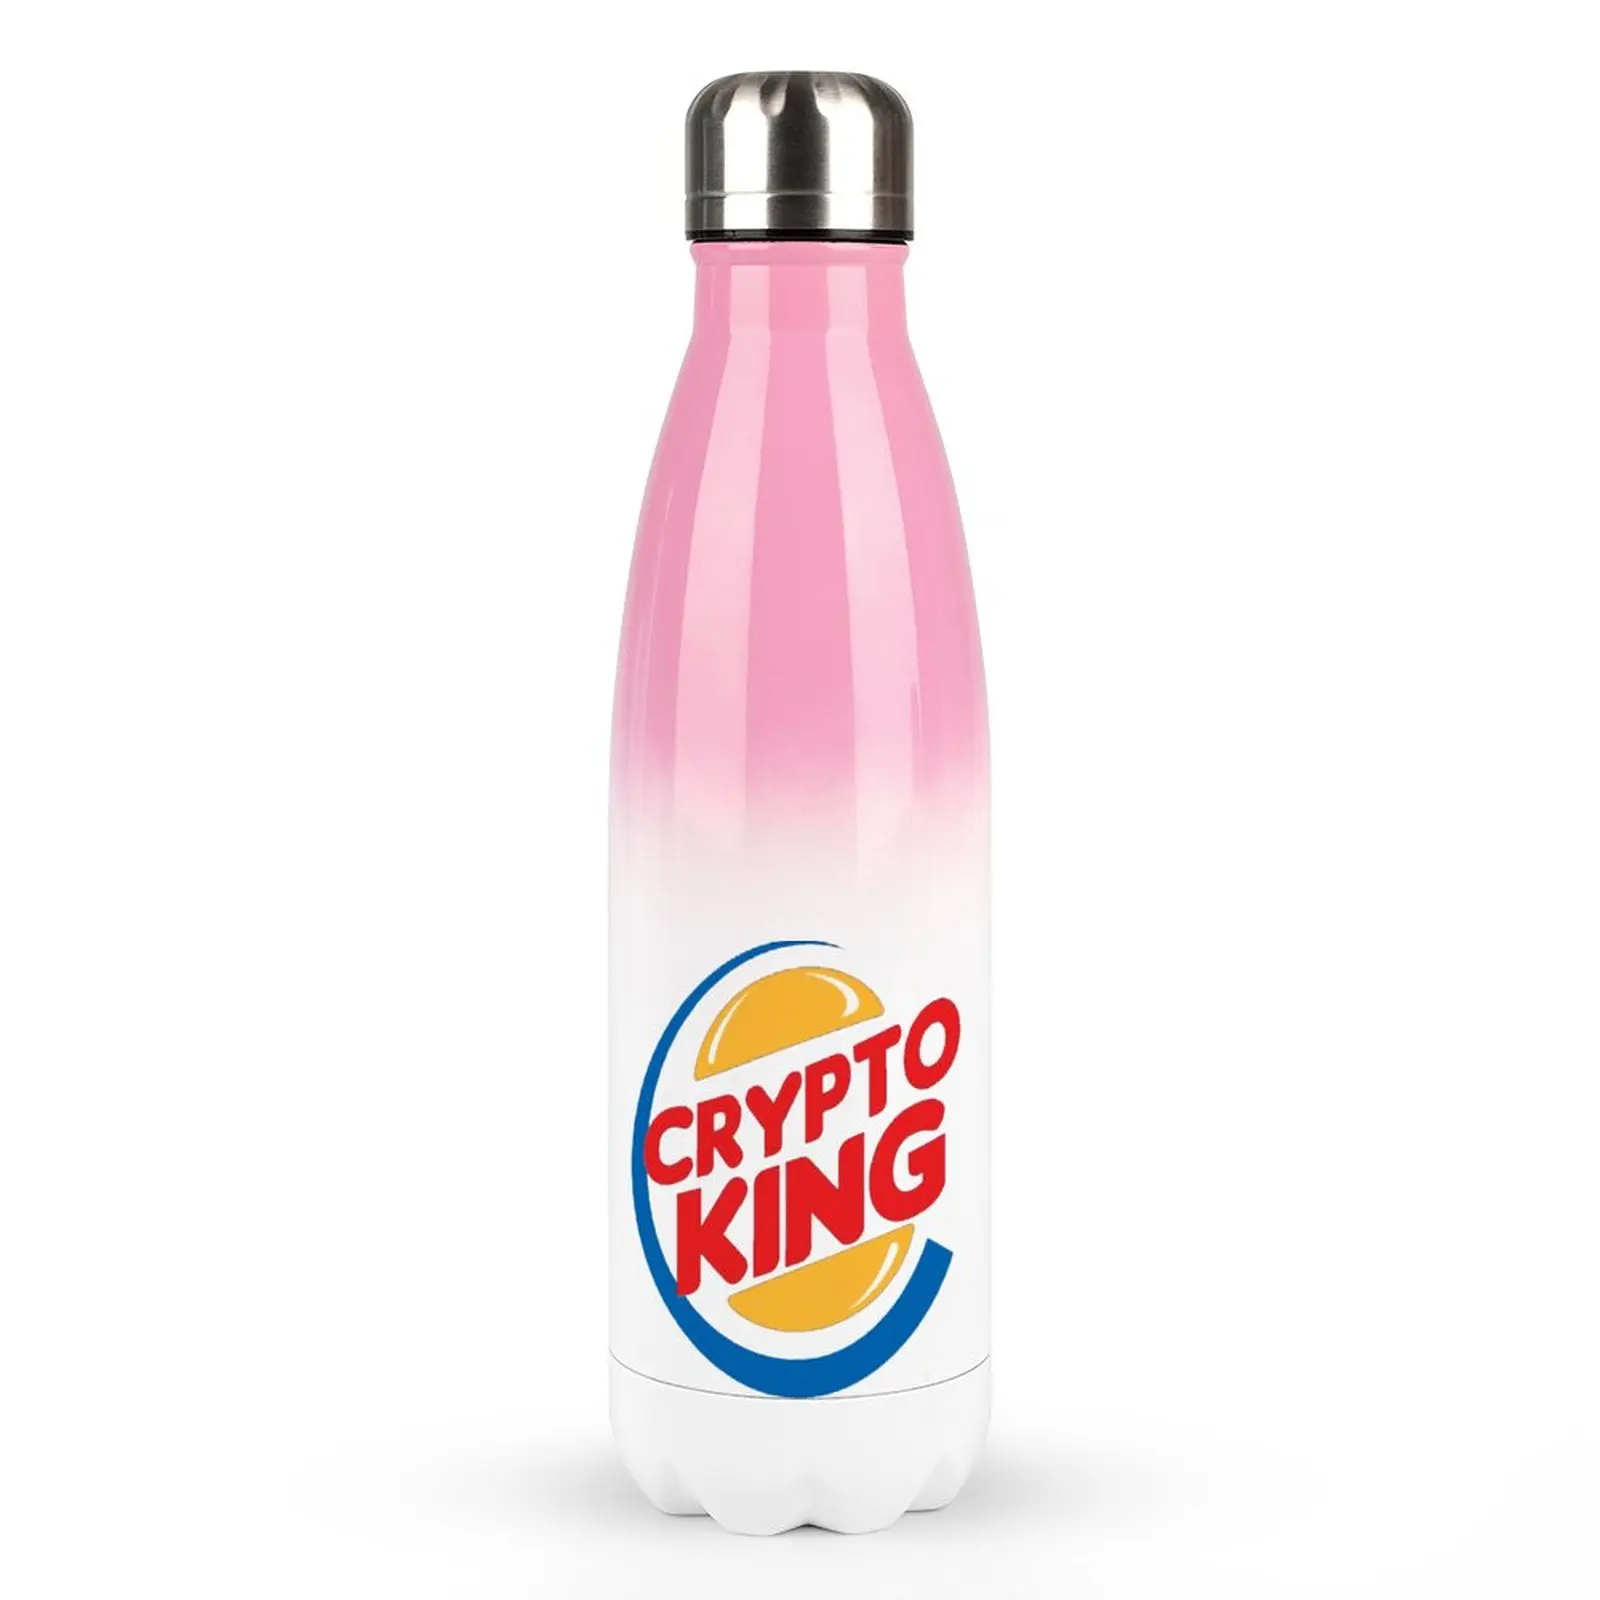 

Crypto King Stainless Steel Water Bottles Hot Sale Bottle Multi-function Cups Thermos Flask Funny Novelty Gradient Effect Glas